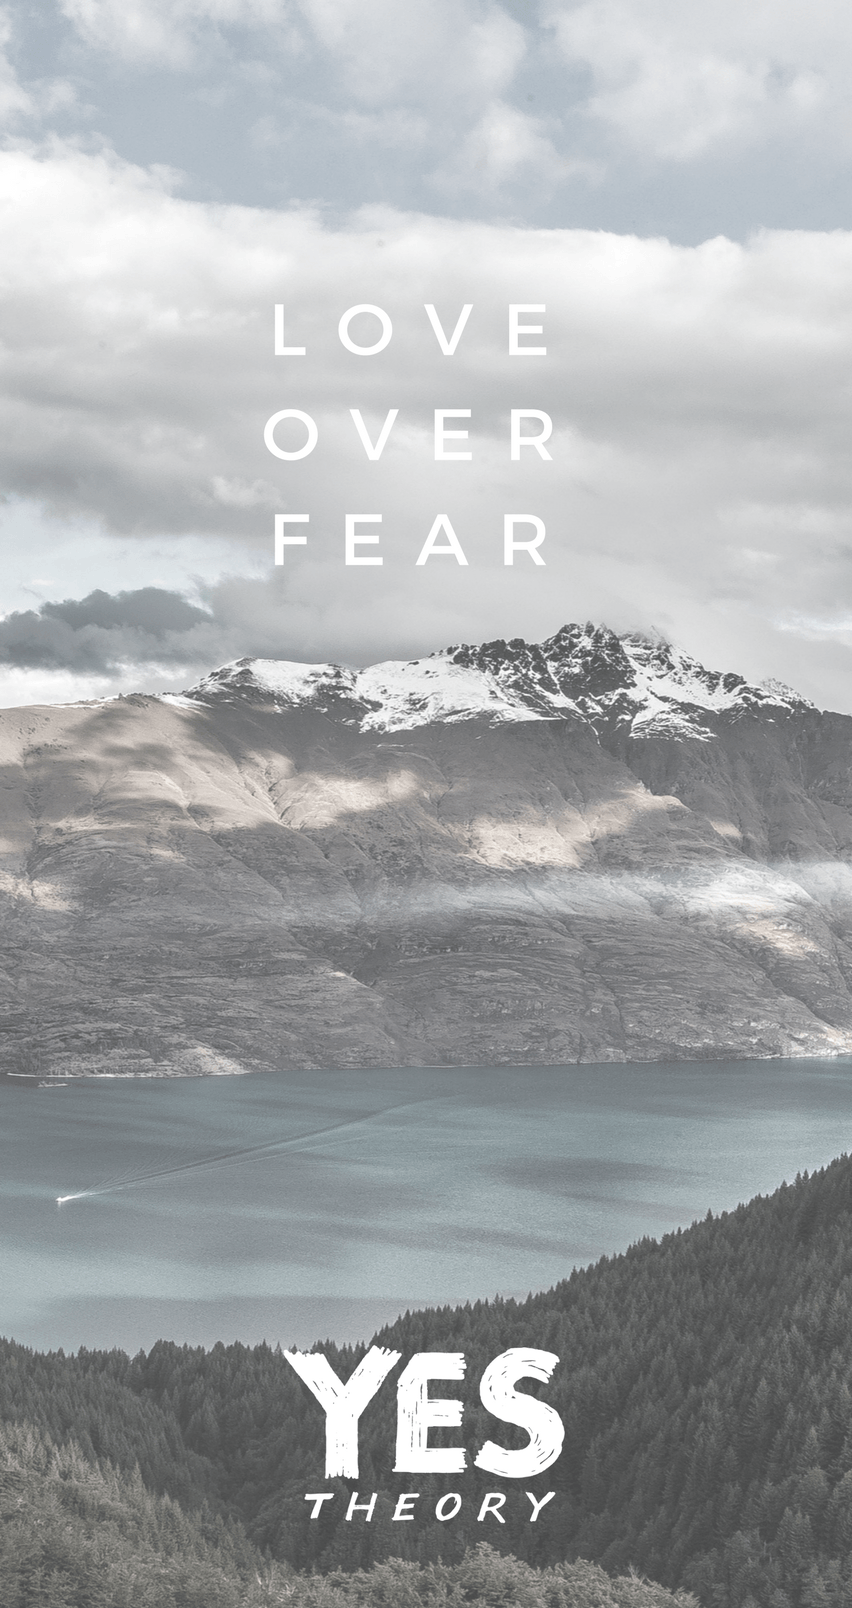 Yes Theory “Love Over Fear” Phone Wallpaper. iPhone wallpaper quotes love, Phone wallpaper quotes, Wallpaper quotes